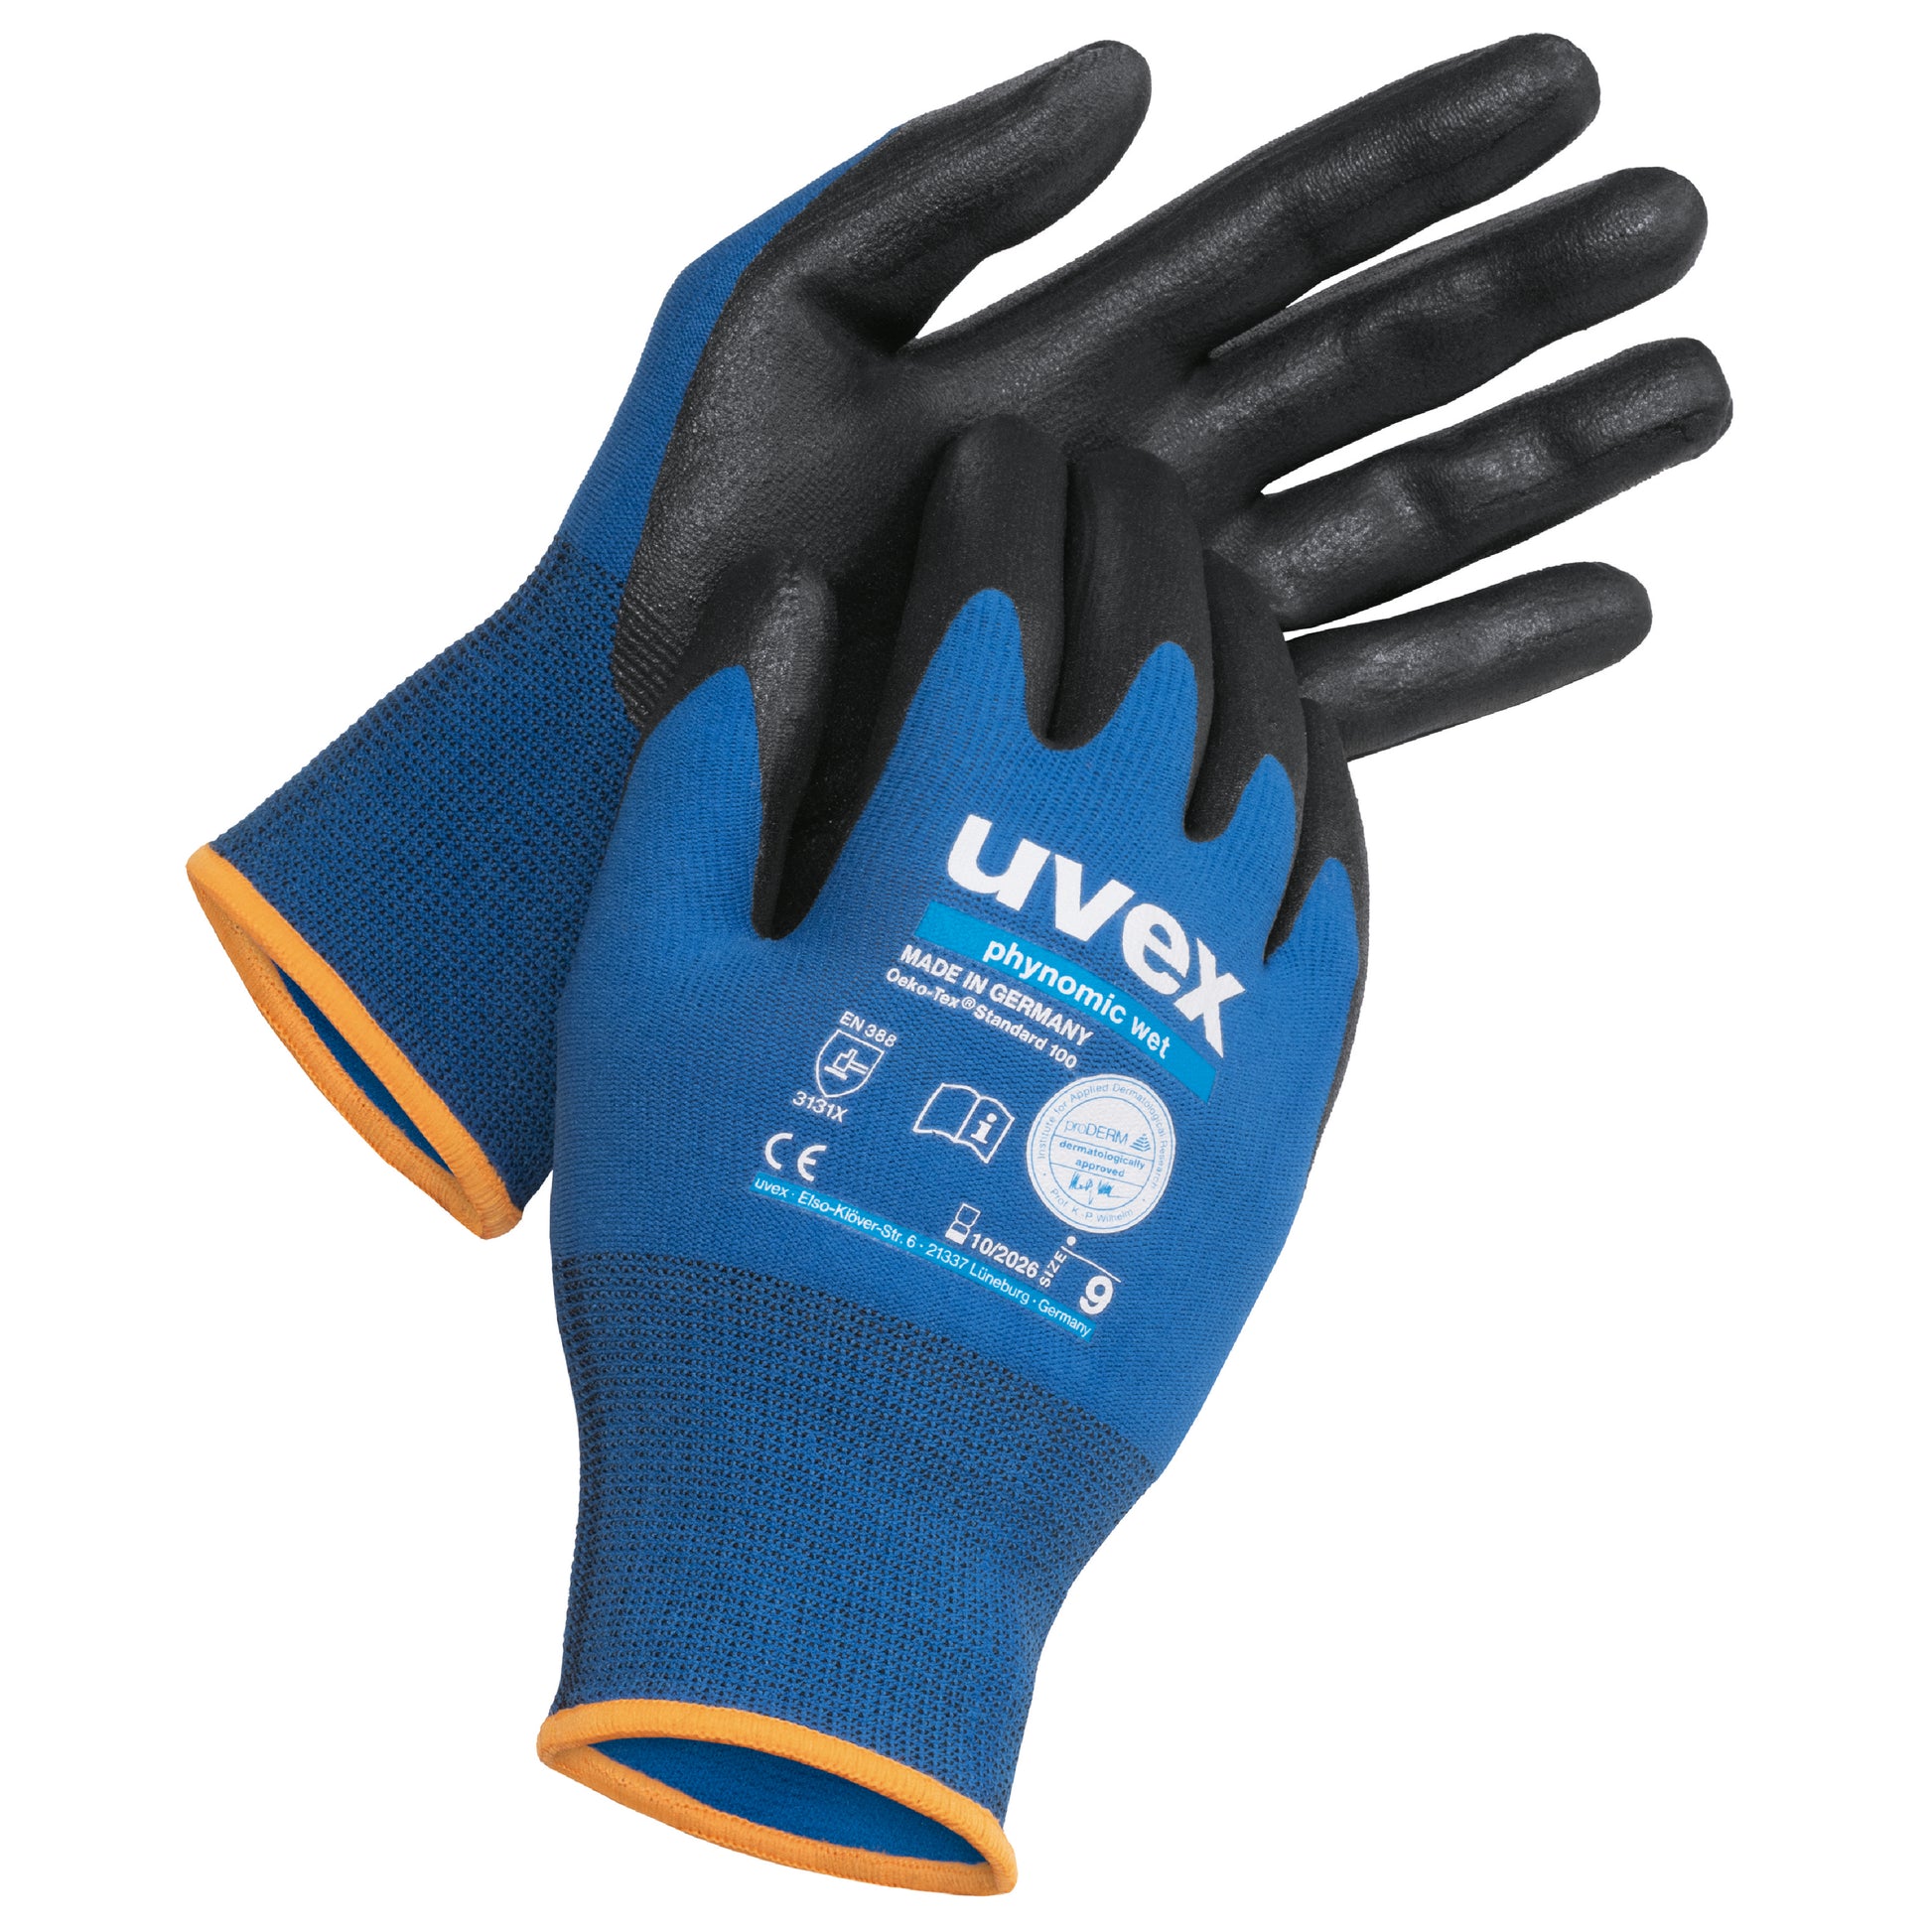 uvex phynomic wet safety gloves. Protect from various hazards.  Re-usable water-repellent aqua-polymer foam coating. Blue with black Polymer coated palms. Protexu